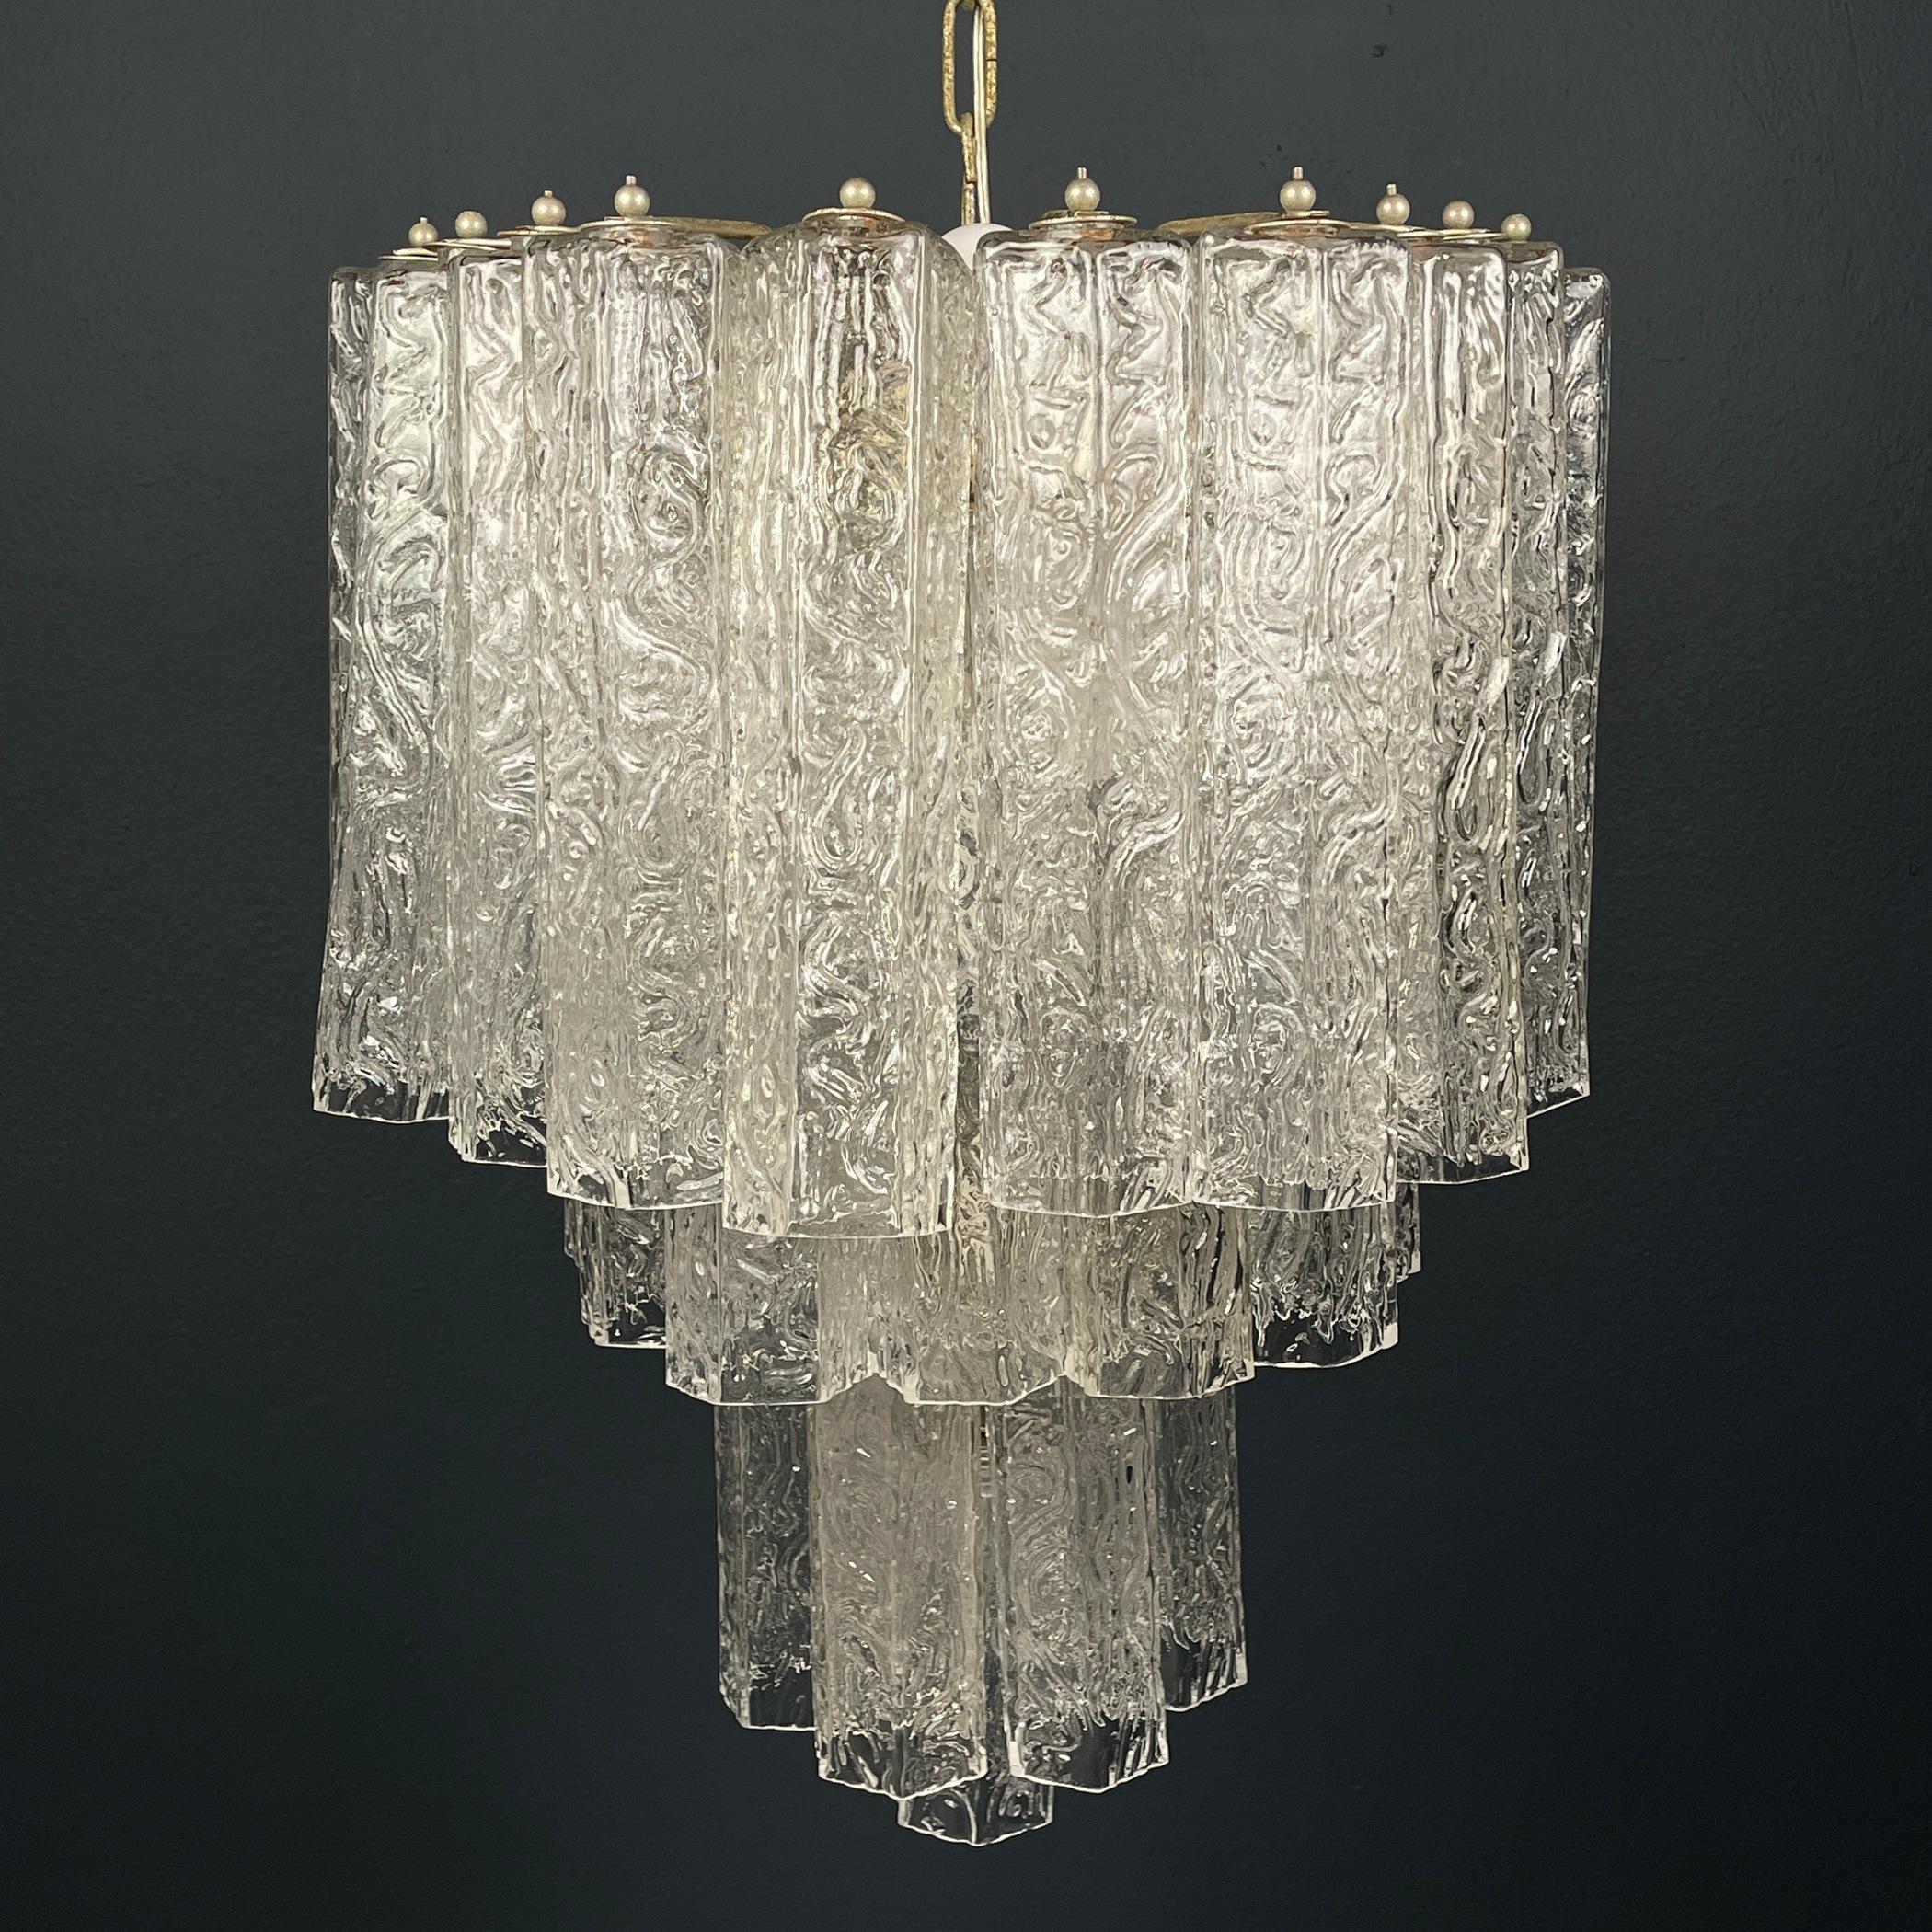 The elegant Murano glass chandelier made in Italy in the 60s. Design Venini & Co. Venini & Co. played a leading role in the revival of Italy’s high-end glass industry, pairing innovative modernist designers with the skilled artisans in the